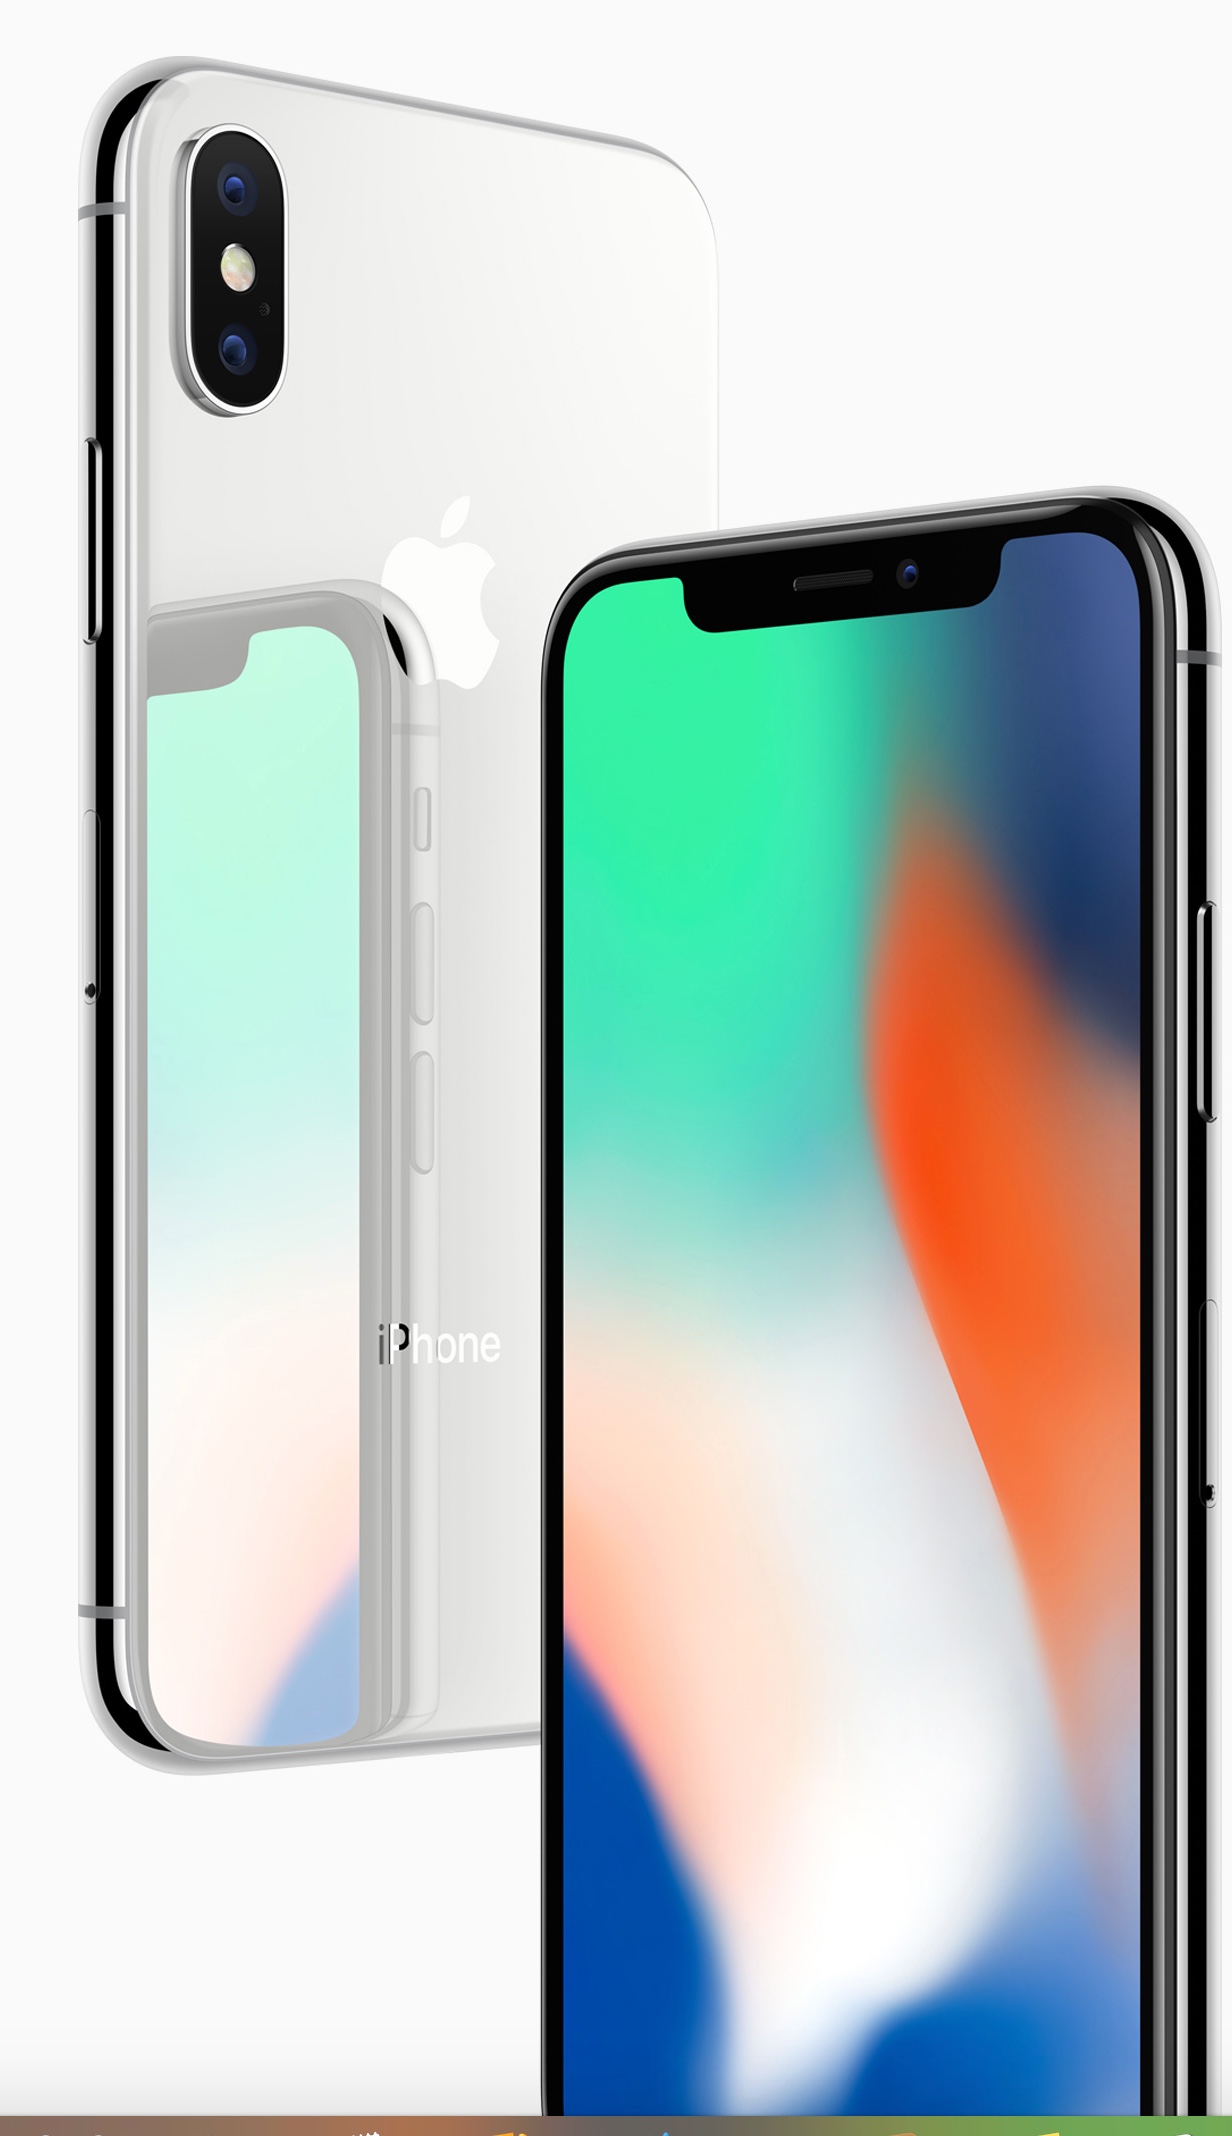 Sprint offers iPhone X for $5/month for a limited time